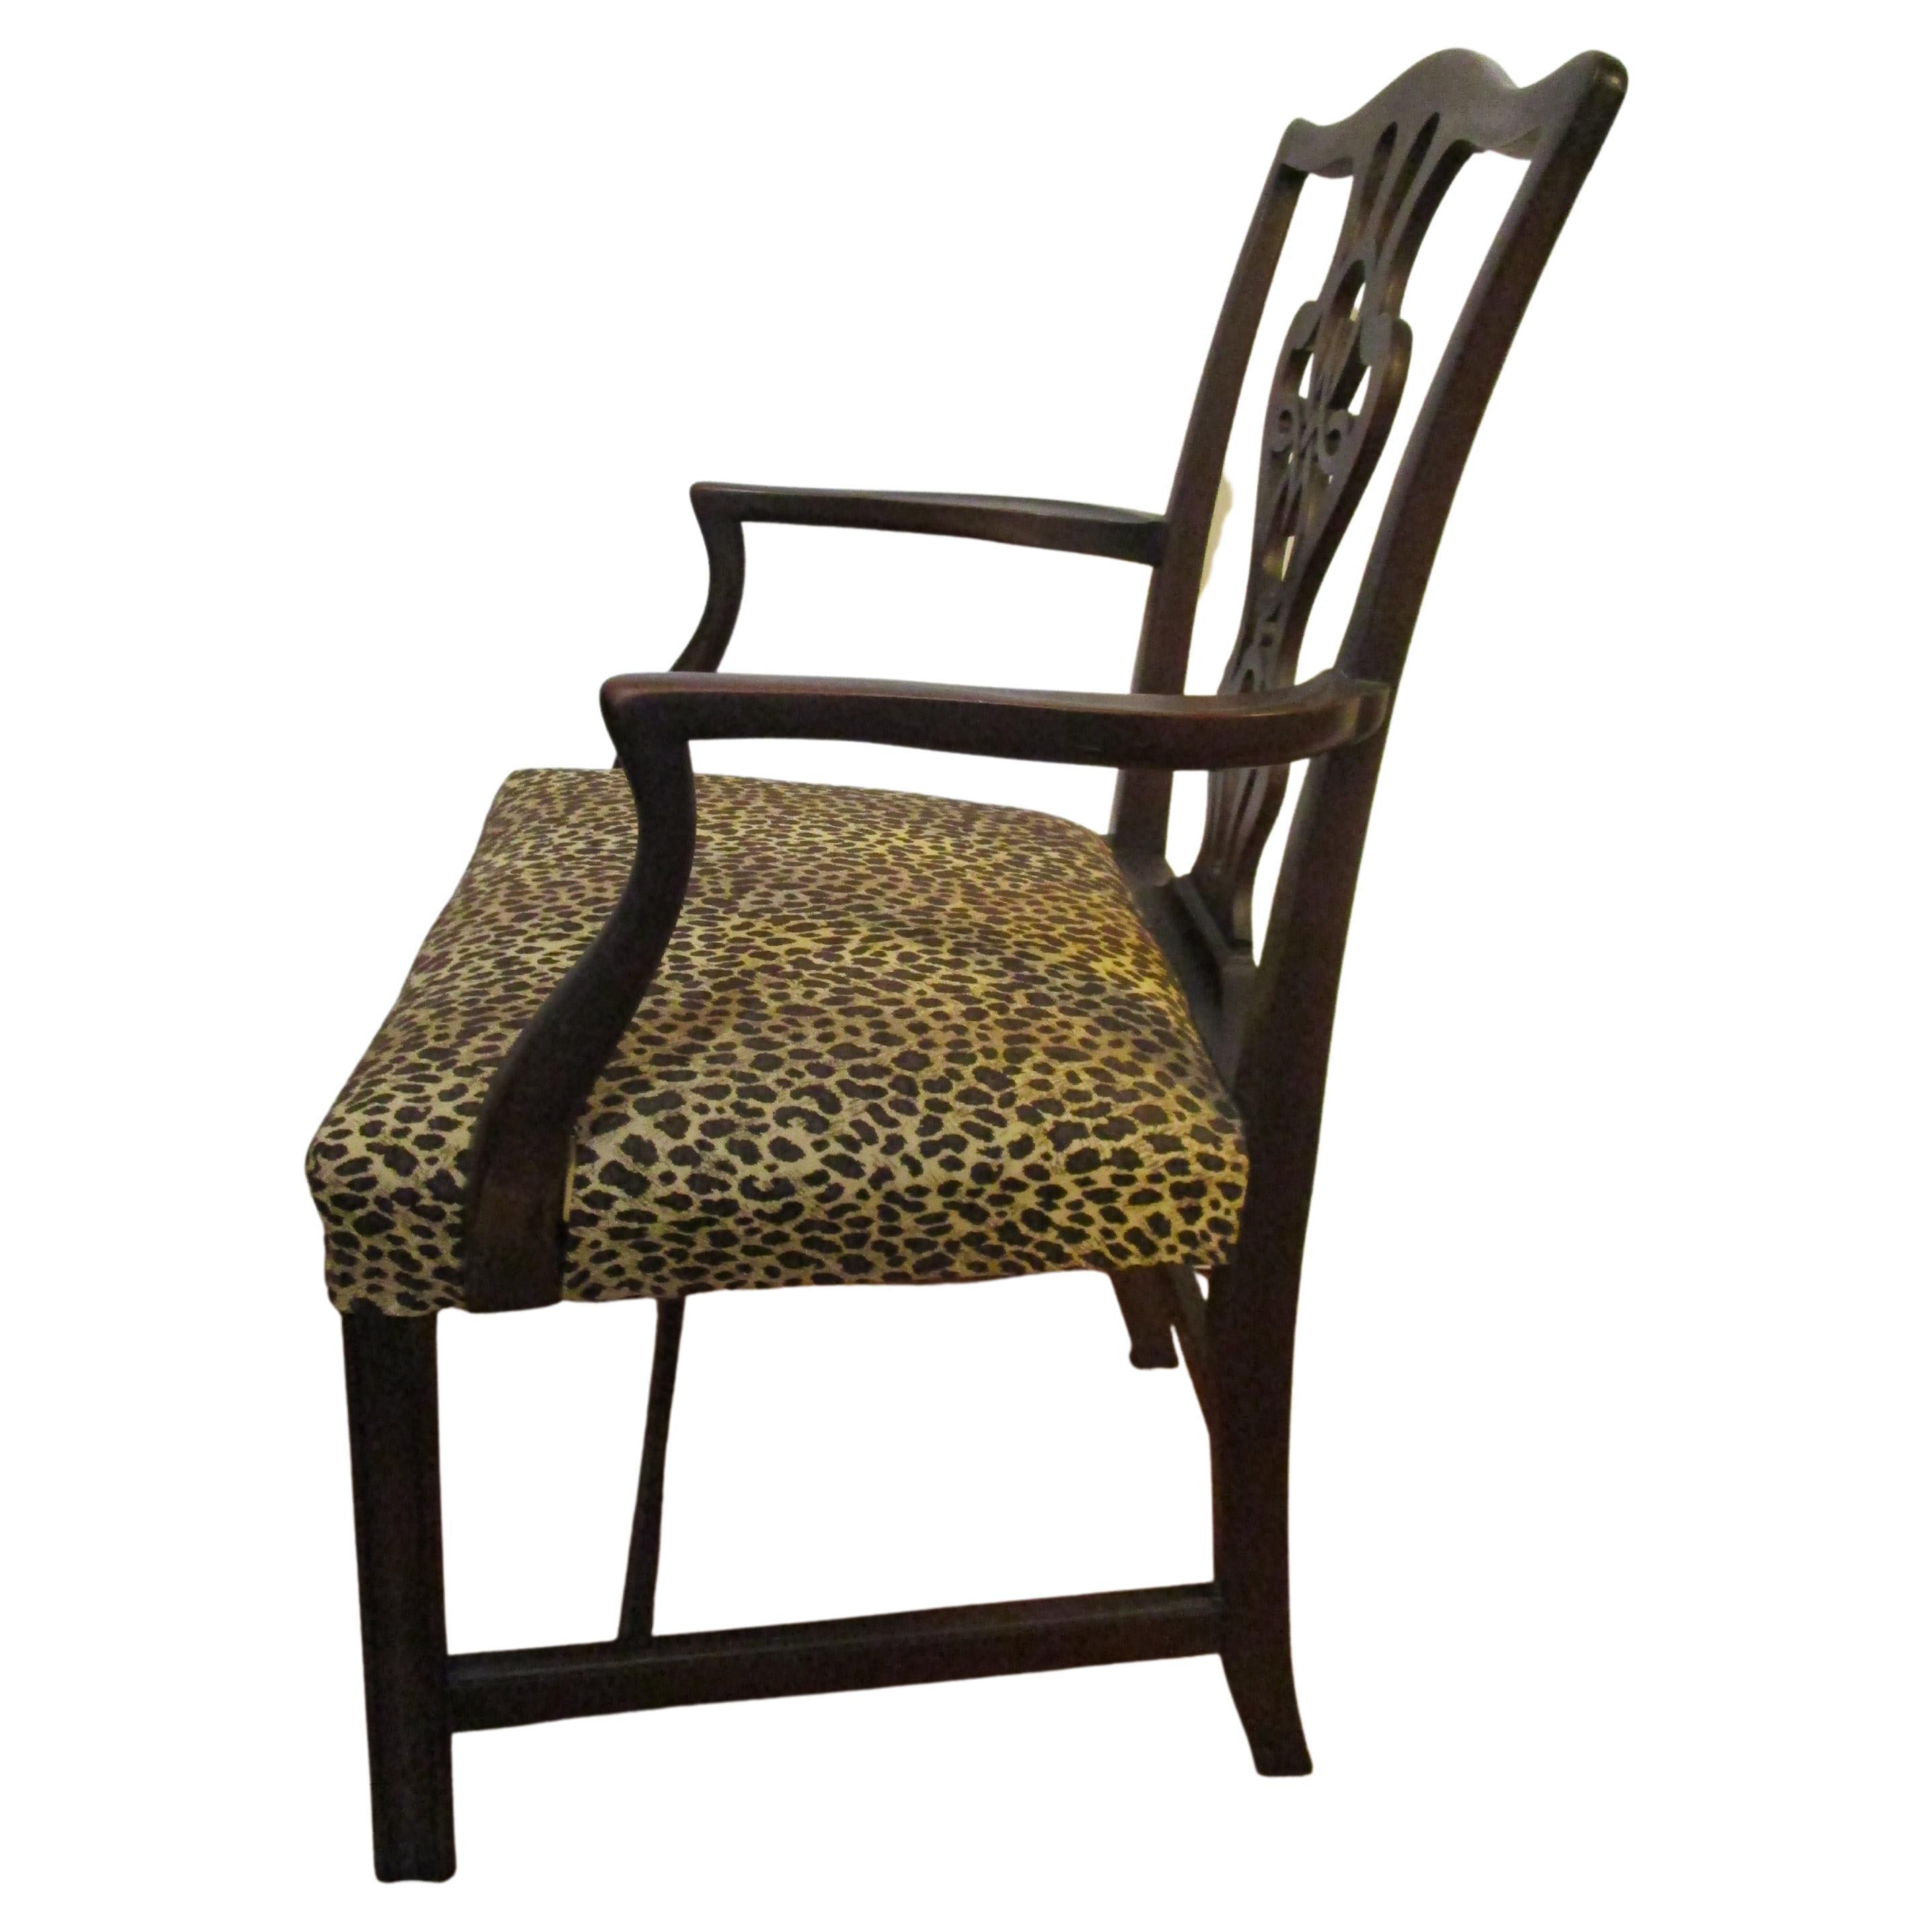 The patina and quality of this late 19th century transitional Chippendale armchair from the Federal period is a standout. It is the deepest tone mahogany. The contrast of Chippendale, covered in a later modern leopard pattern is quite smart. The